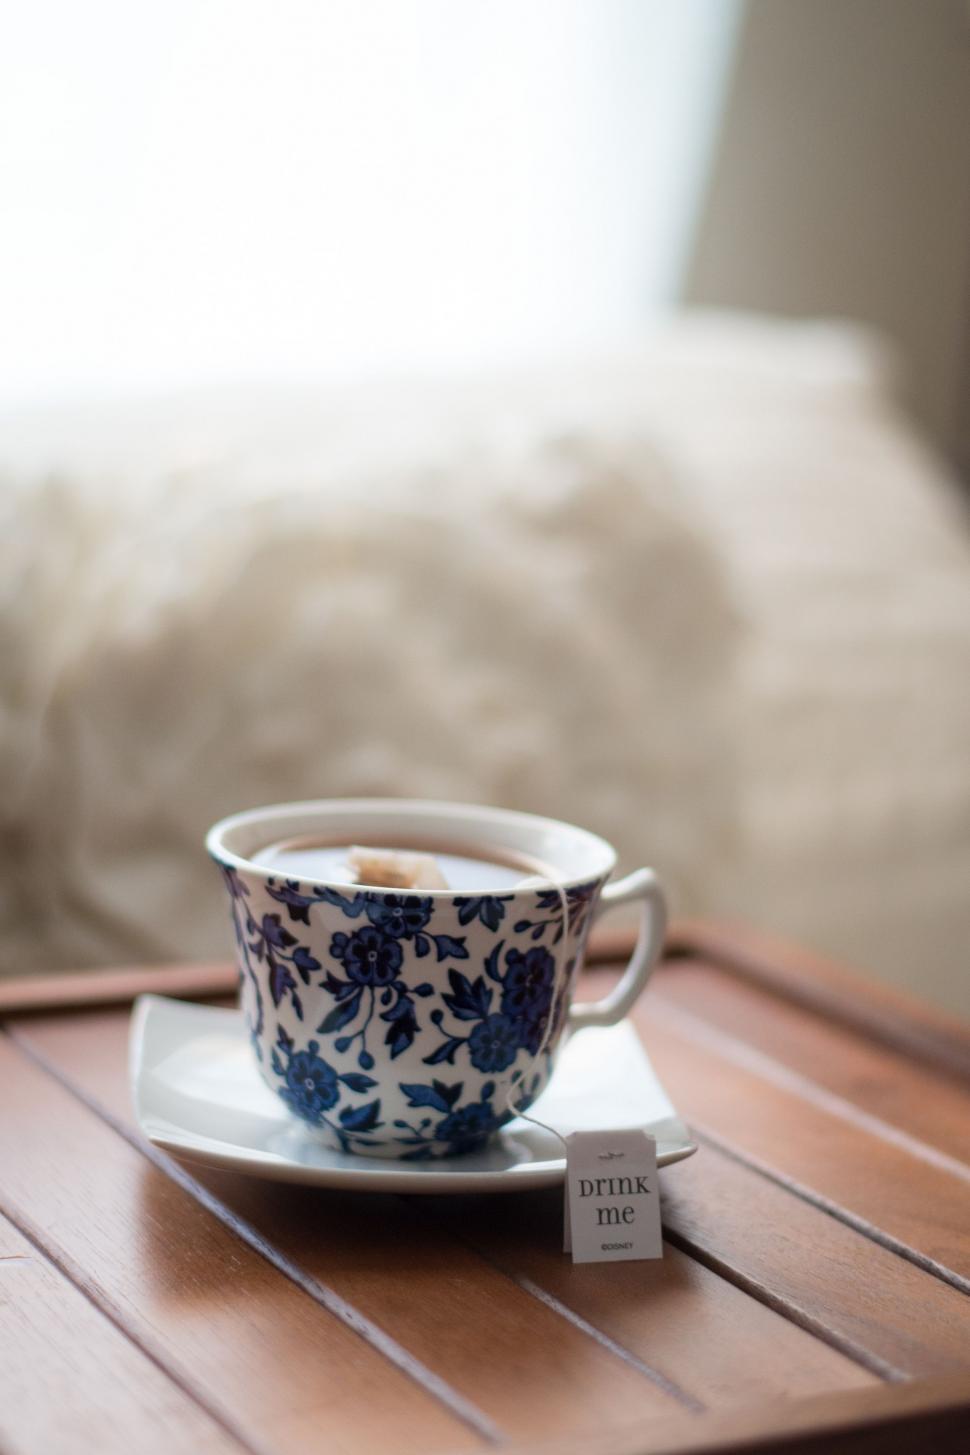 Free Image of Blue and White Tea Cup on Wooden Table 